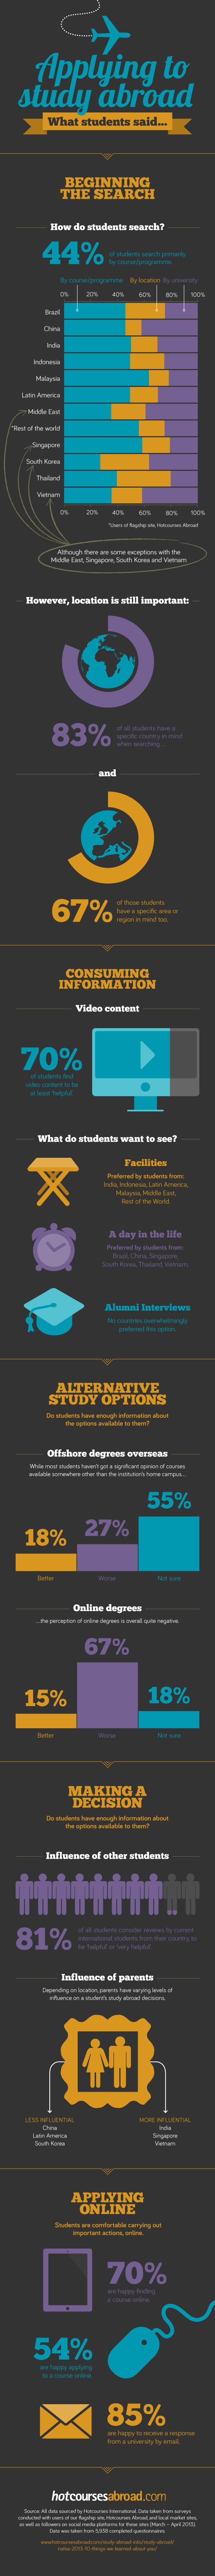 Student Survey: 10 findings into how students apply to study abroad [Infographic]